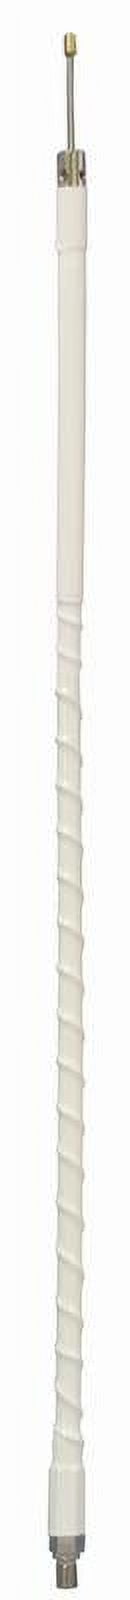 Picture of Accessories Unlimited AUT300-W 1,000W 3 ft. Heavy Duty 0.38 ft. x 24 in. Tune-Able Tip CB Antenna, White